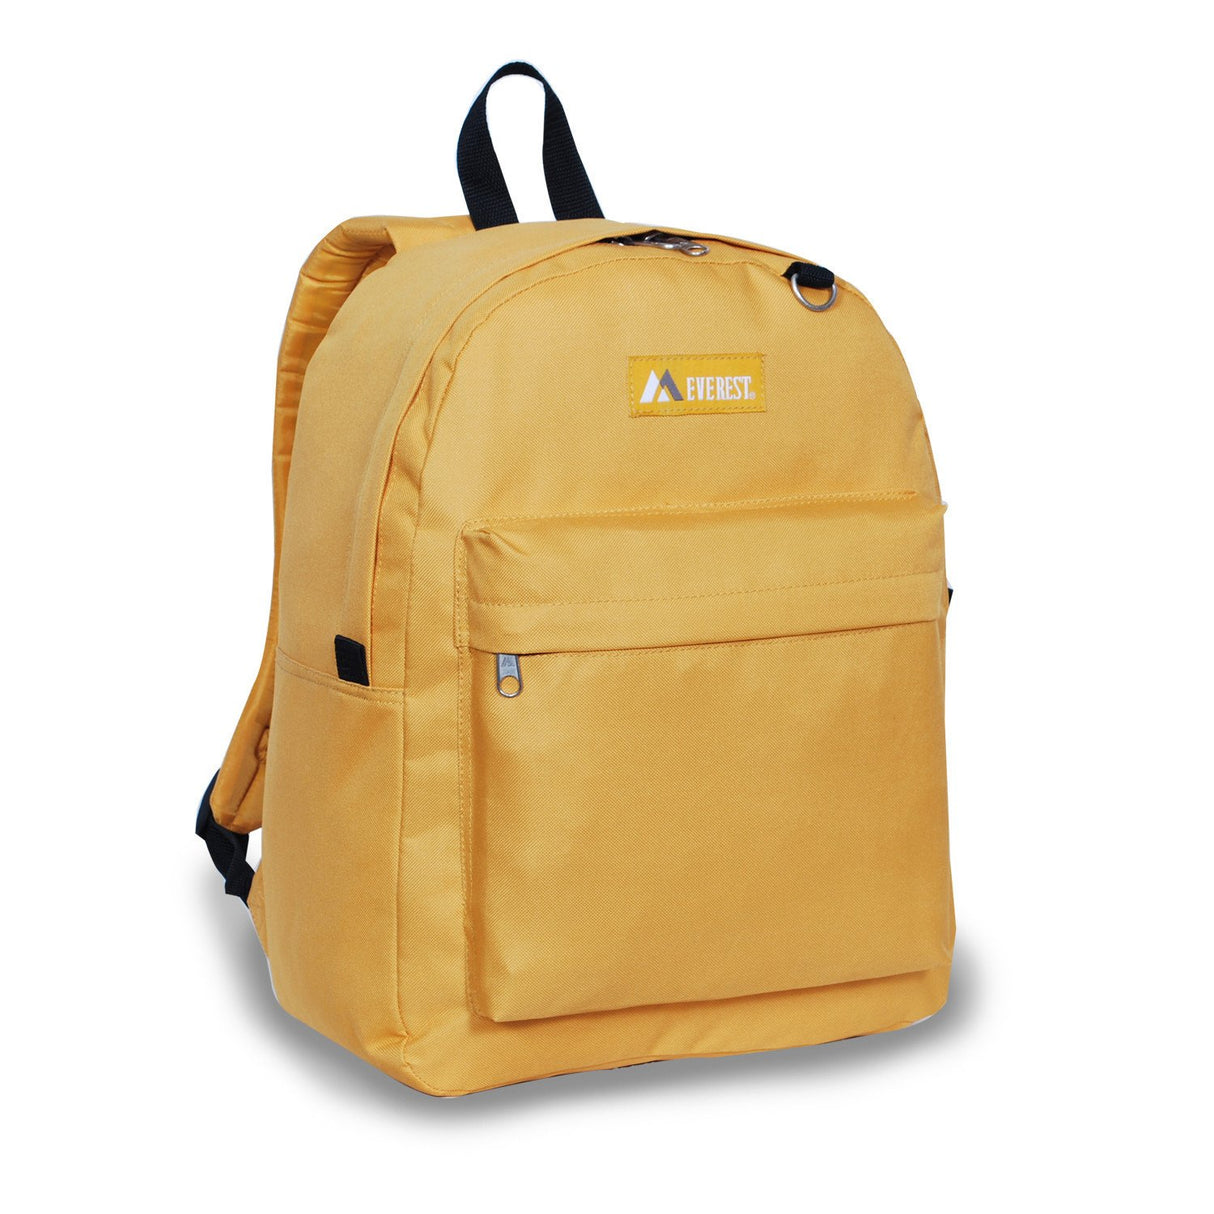 Durable Yellow Classic Backpack Cheap